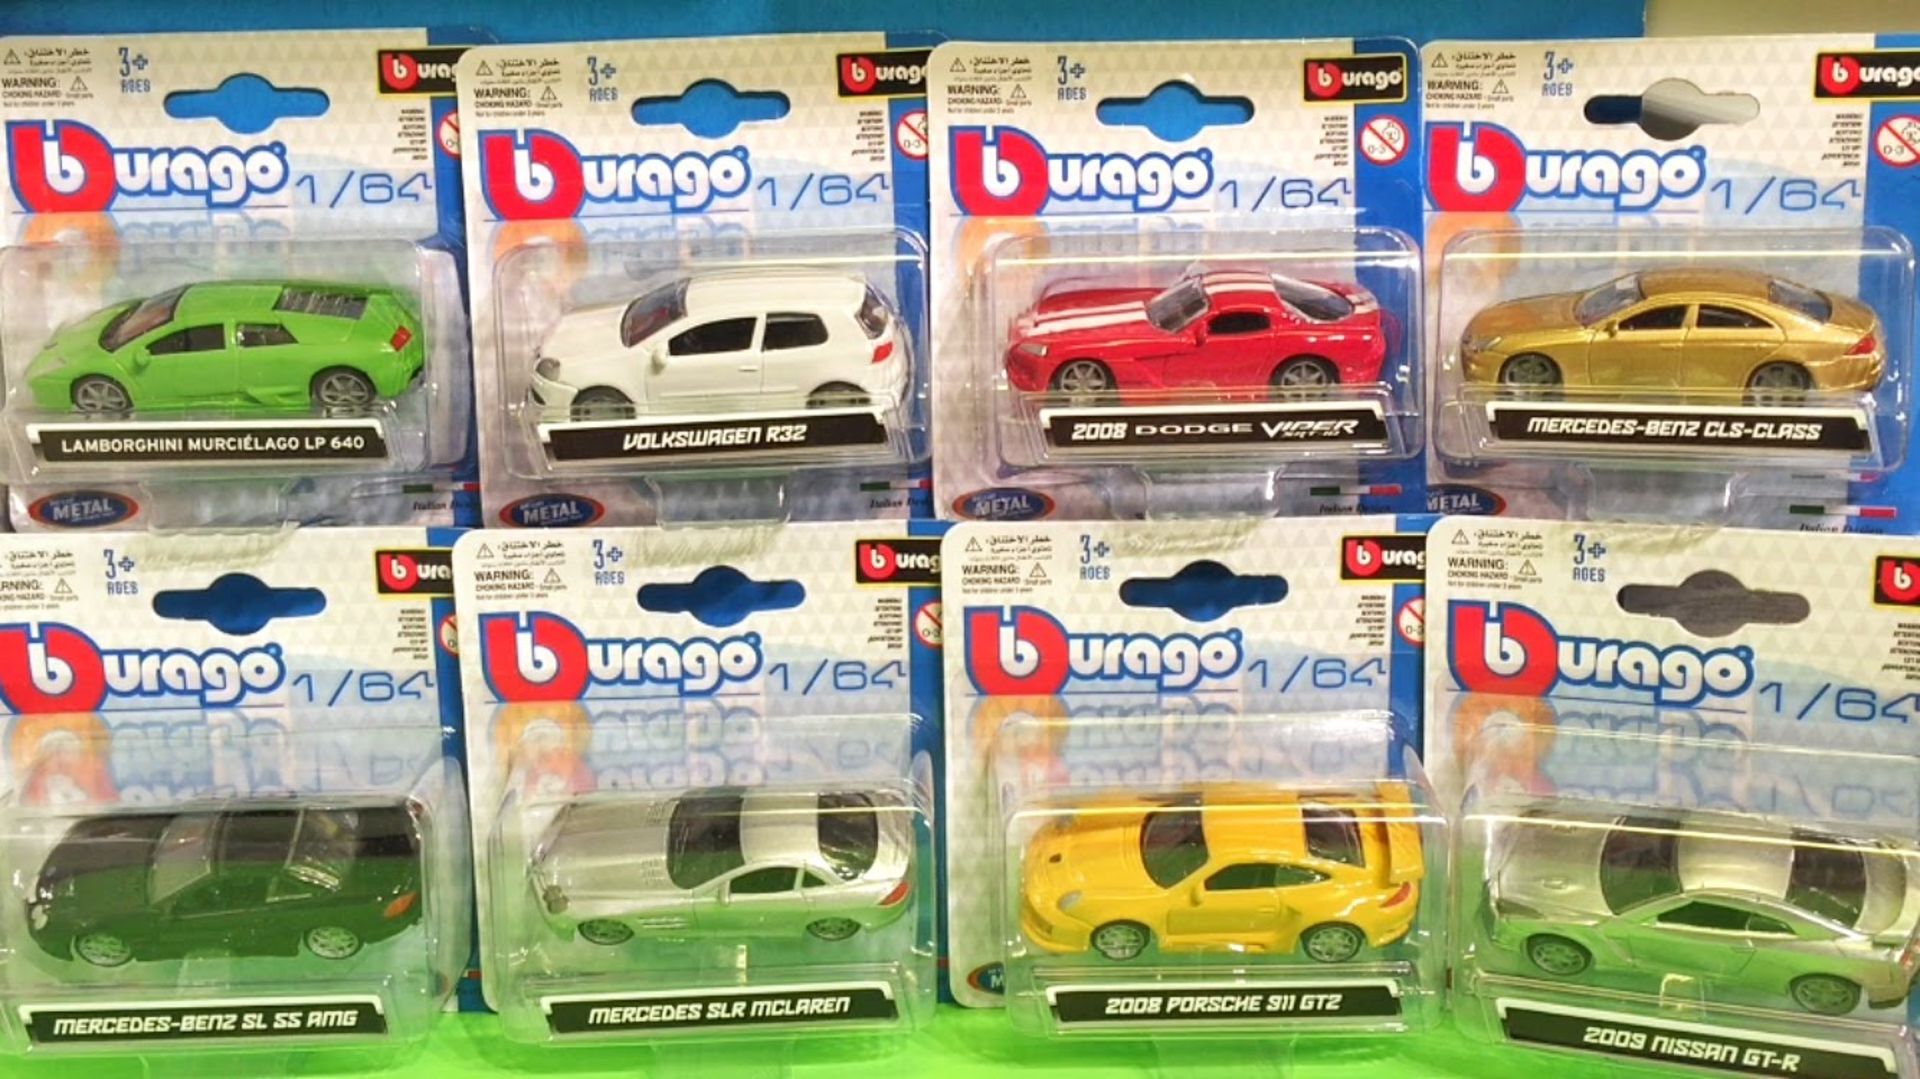 V Brand New Lot of Twelve Burago Toy Cars 1/64 Scale (Cars May Vary From Image - For reference Only)